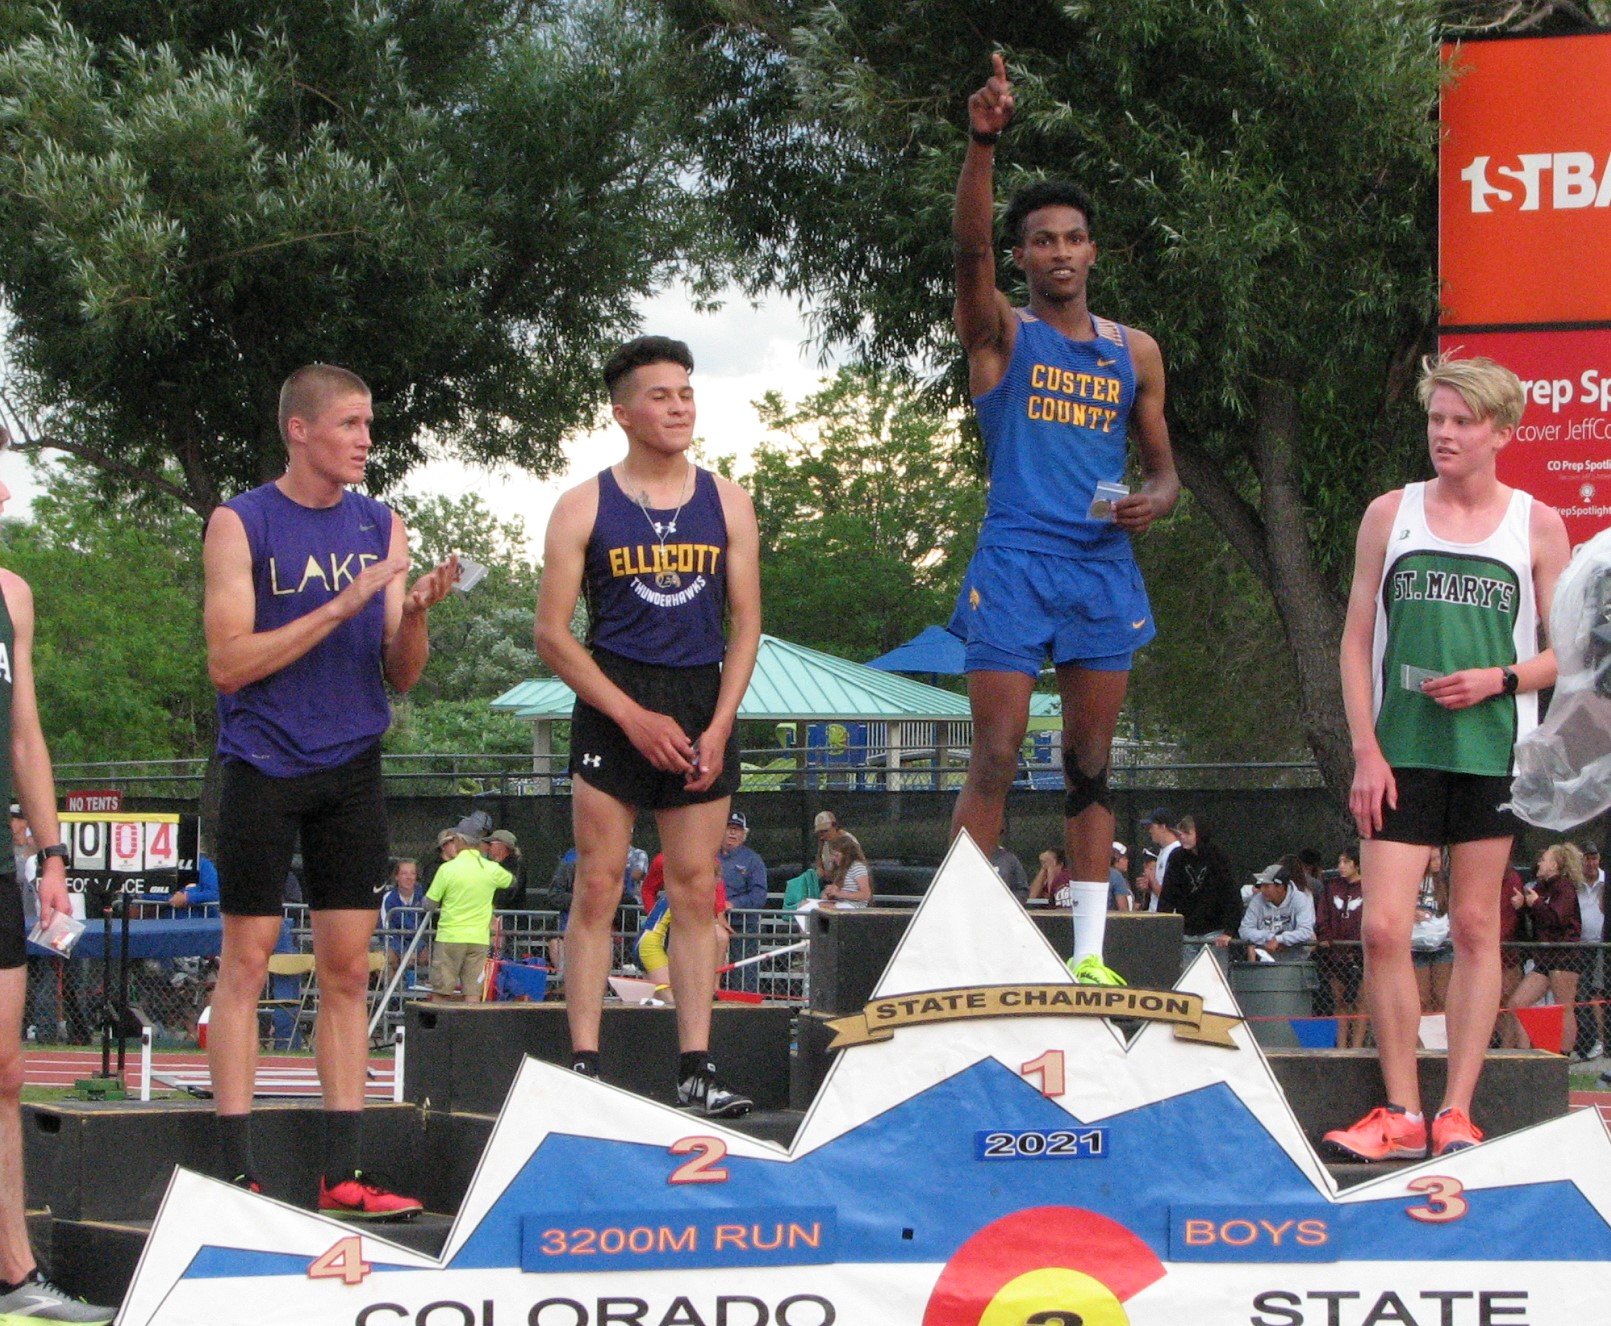 Saturday’s schedule of events for locals at State Track and Field